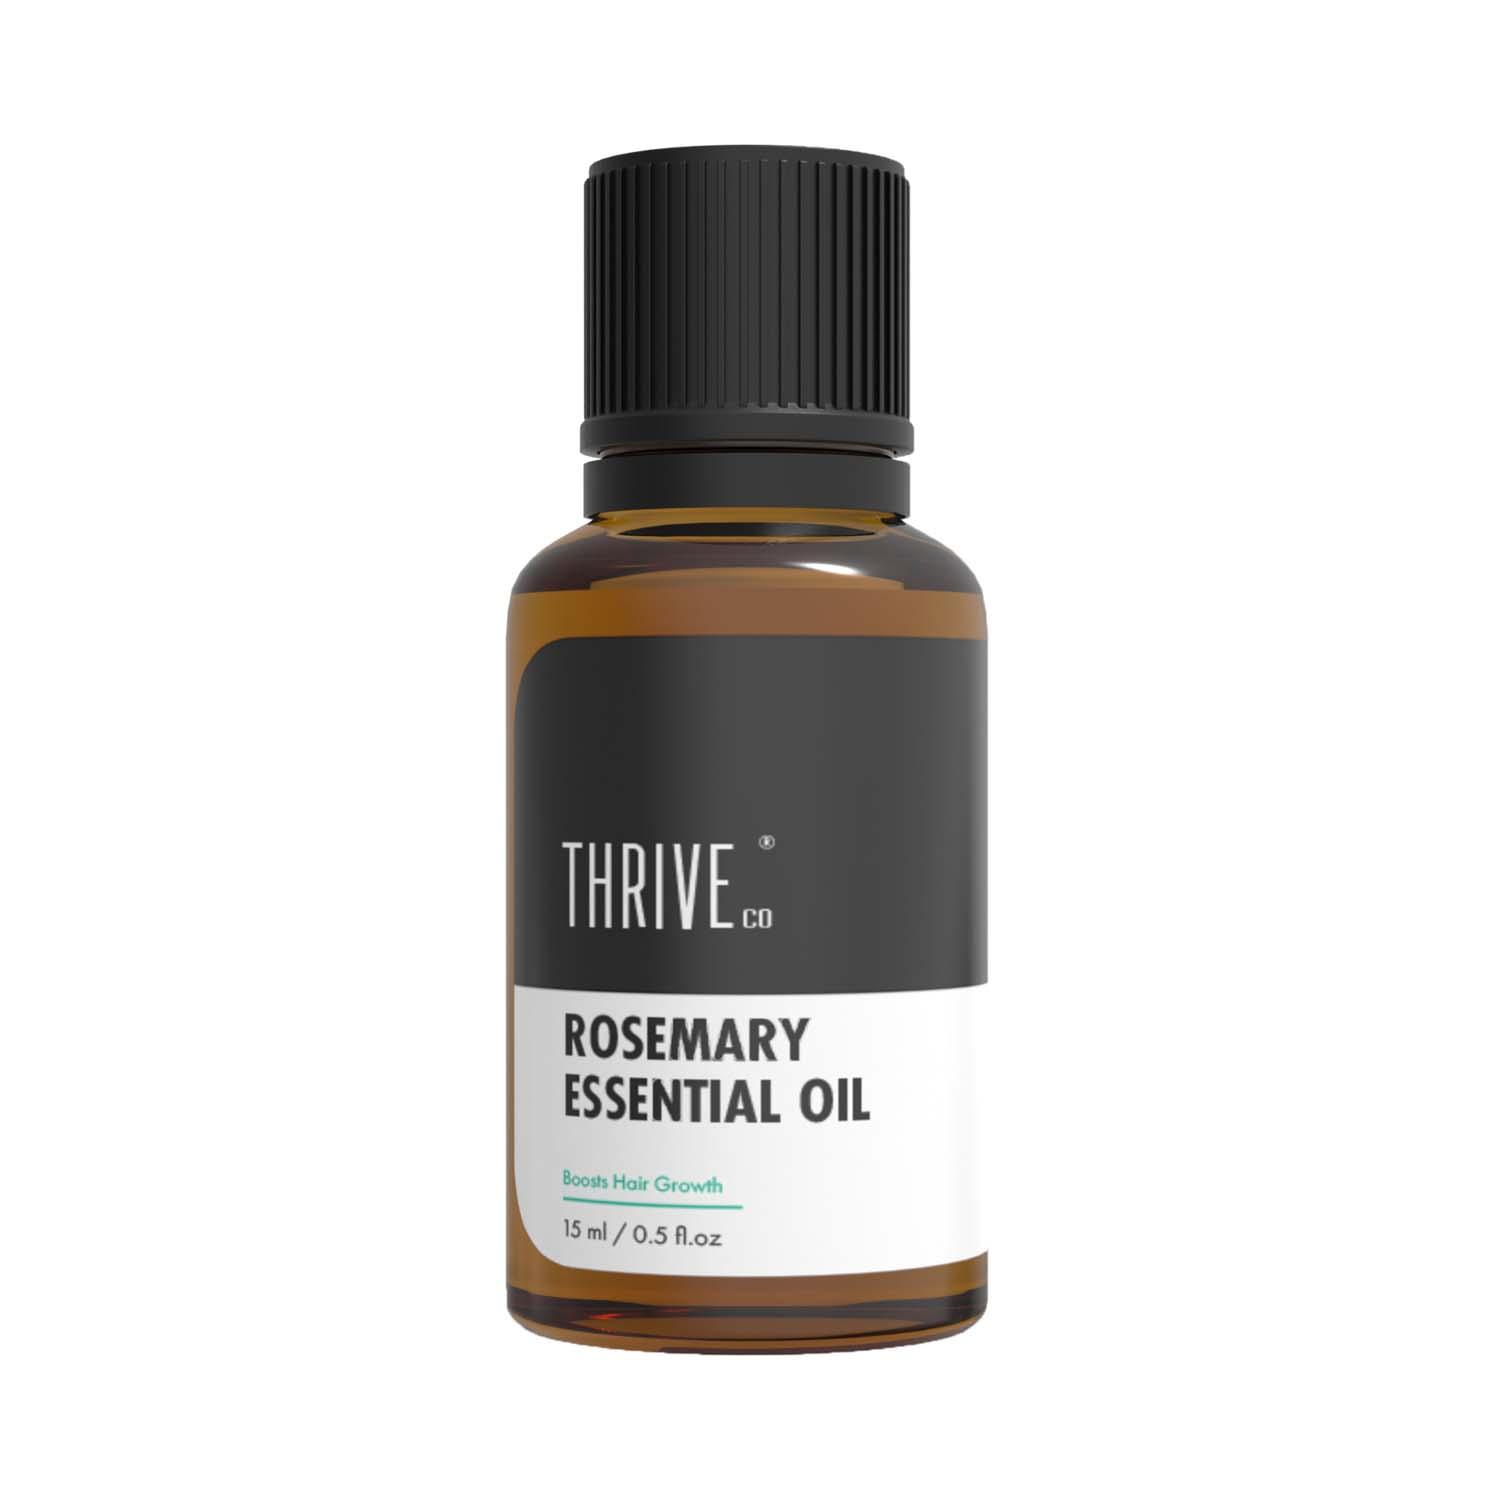 Thriveco | Thriveco Rosemary Essential Oil (15 ml)